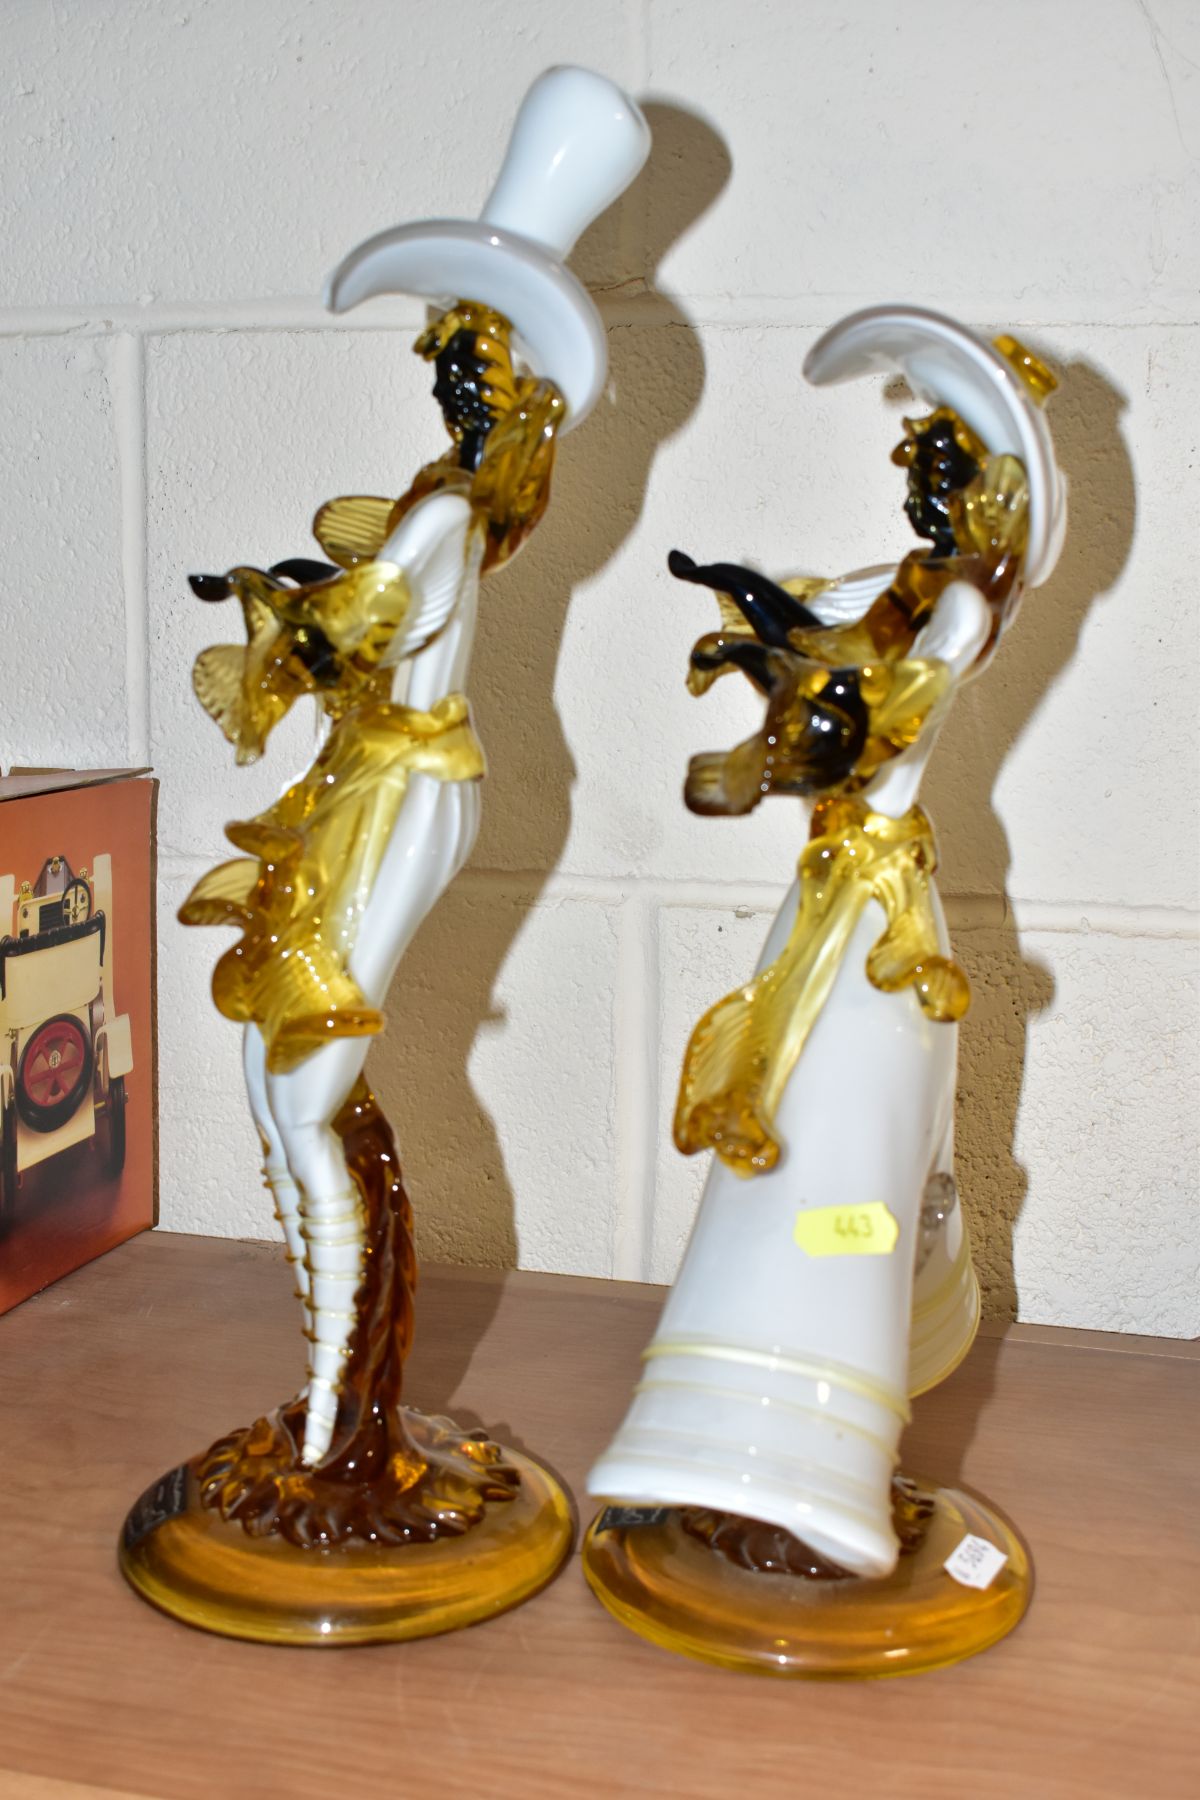 A PAIR OF VENETIAN GLASS COMPANY FIGURES OF A LADY AND GENTLEMAN, white, amber and black, both - Image 4 of 10